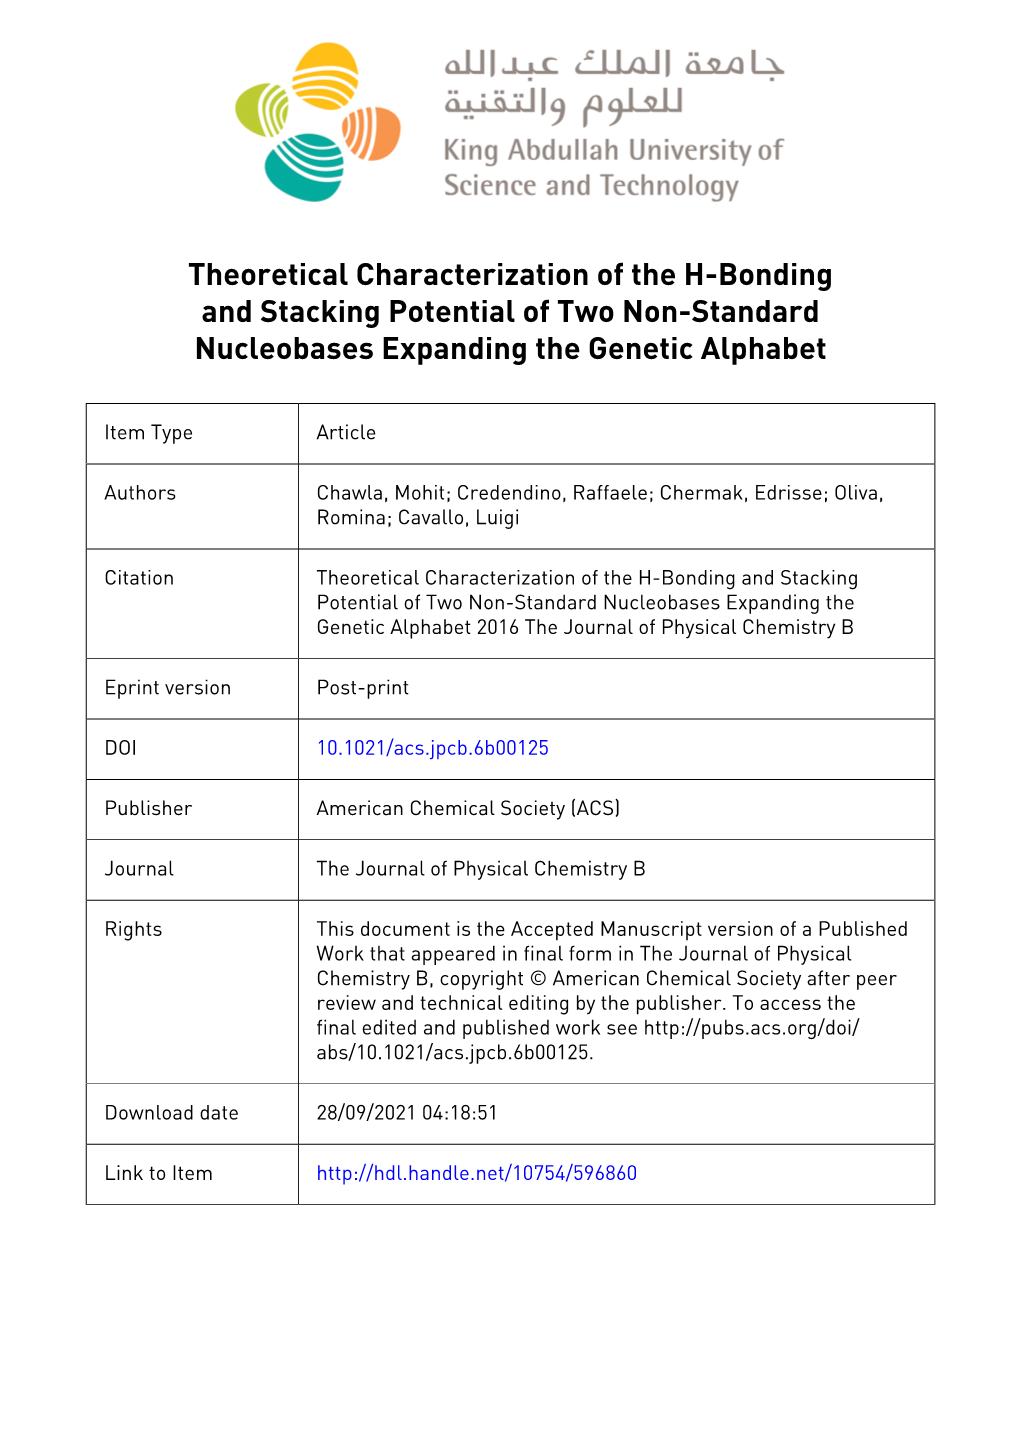 Theoretical Characterization of the H-Bonding and Stacking Potential of Two Non-Standard Nucleobases Expanding the Genetic Alphabet